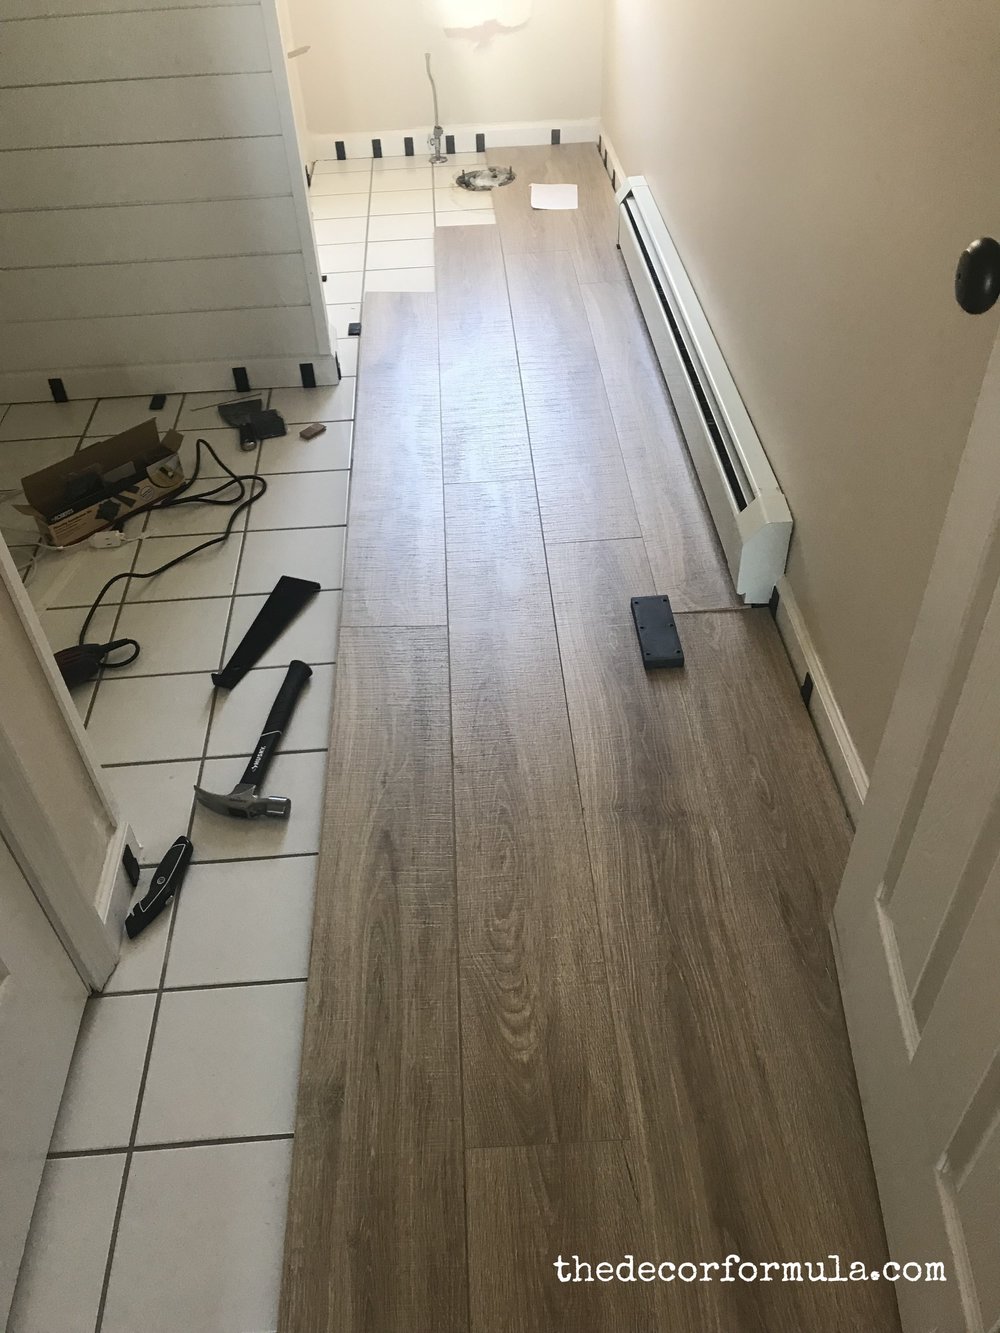 Ideas For Covering Up Tile Floors, What Is The Best Flooring To Put Over Tiles